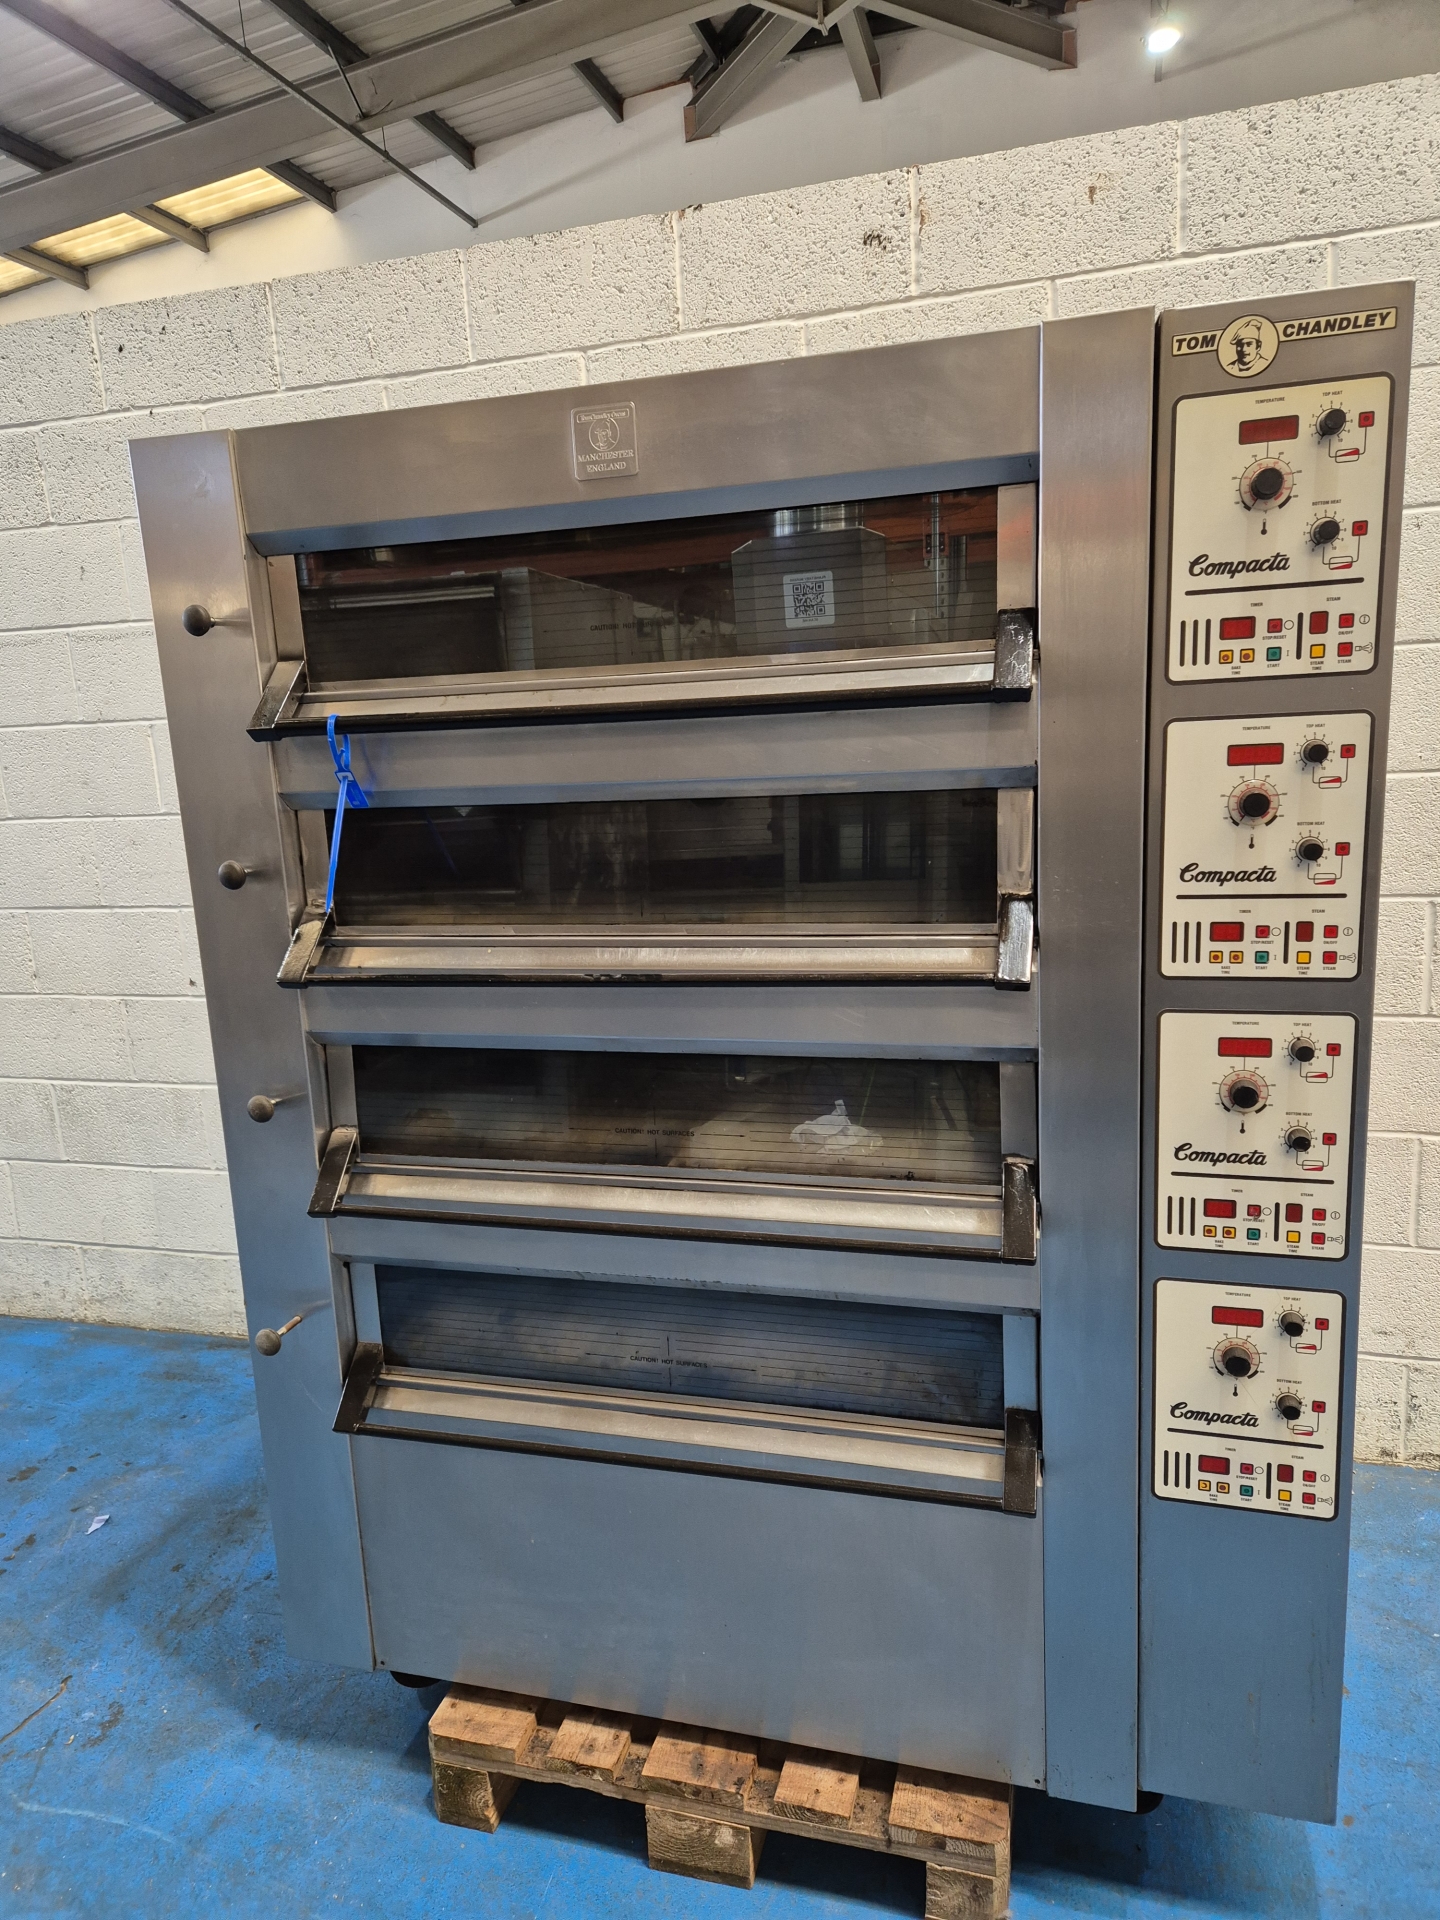 Tom Chandley 8 Tray (18" x 30" Trays) Deck Oven